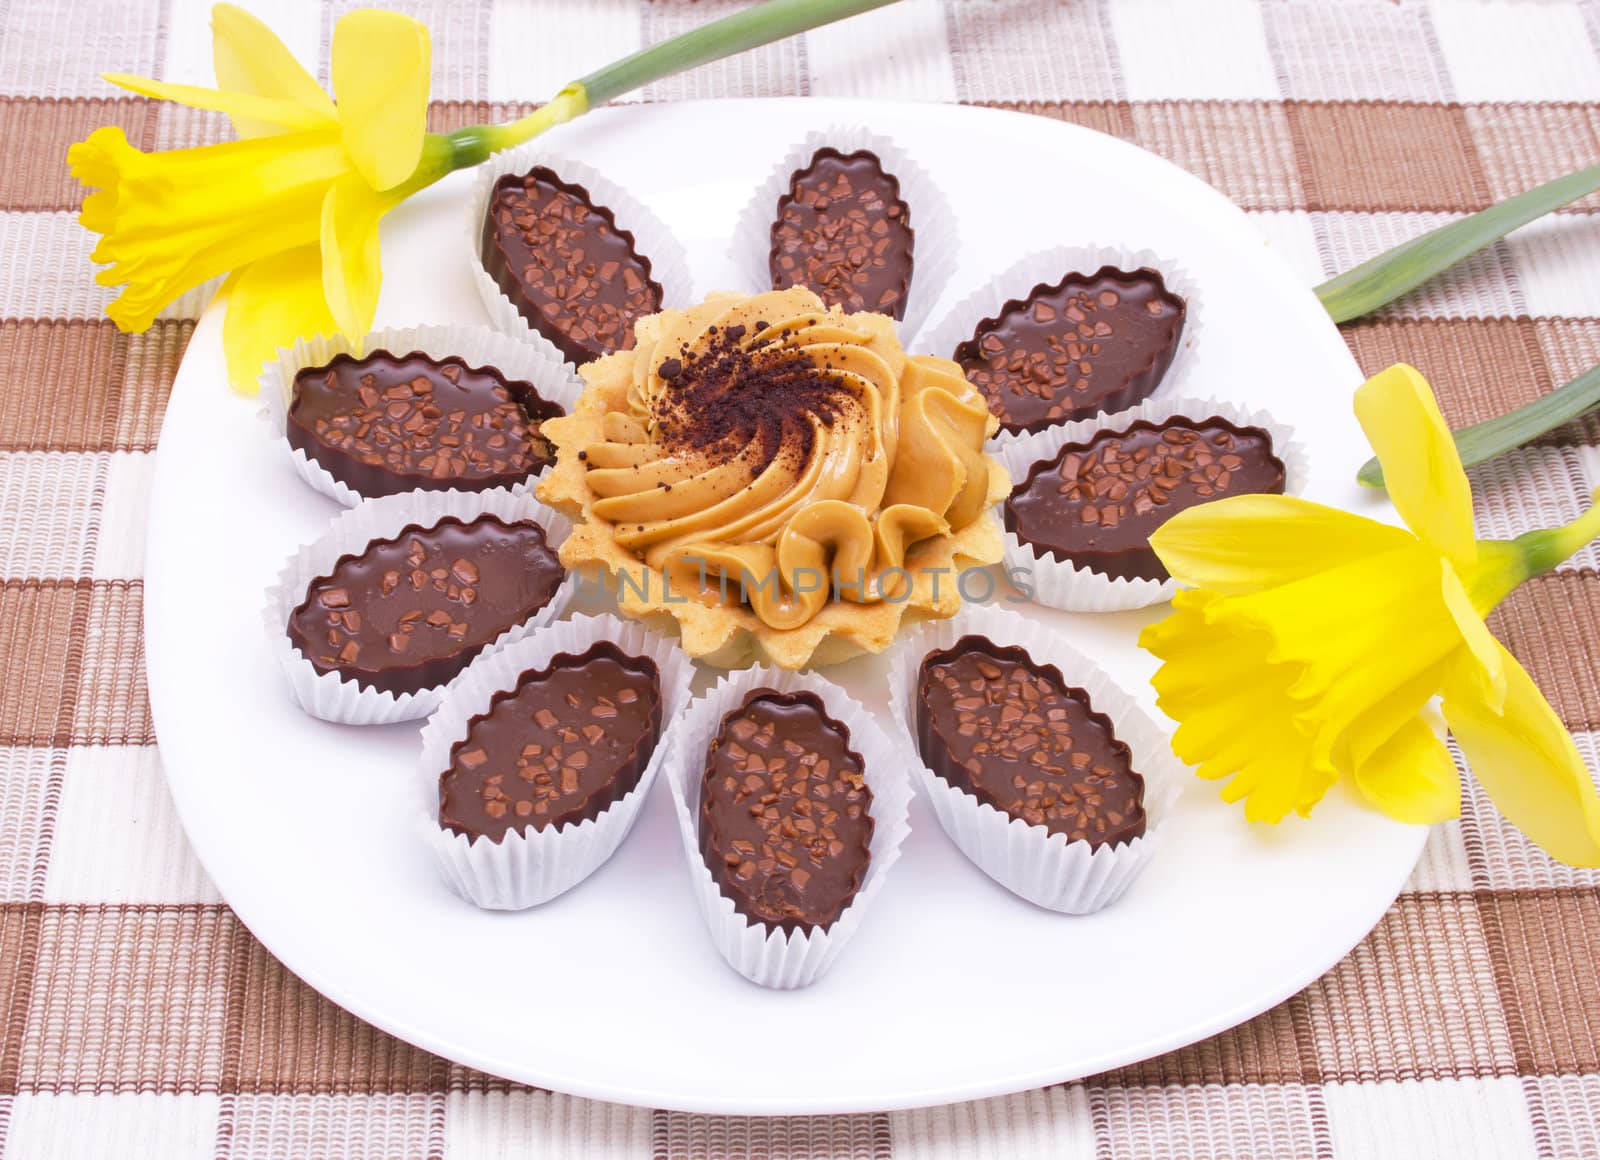 Cake and chocolates on the white plate with two yellow daffodils